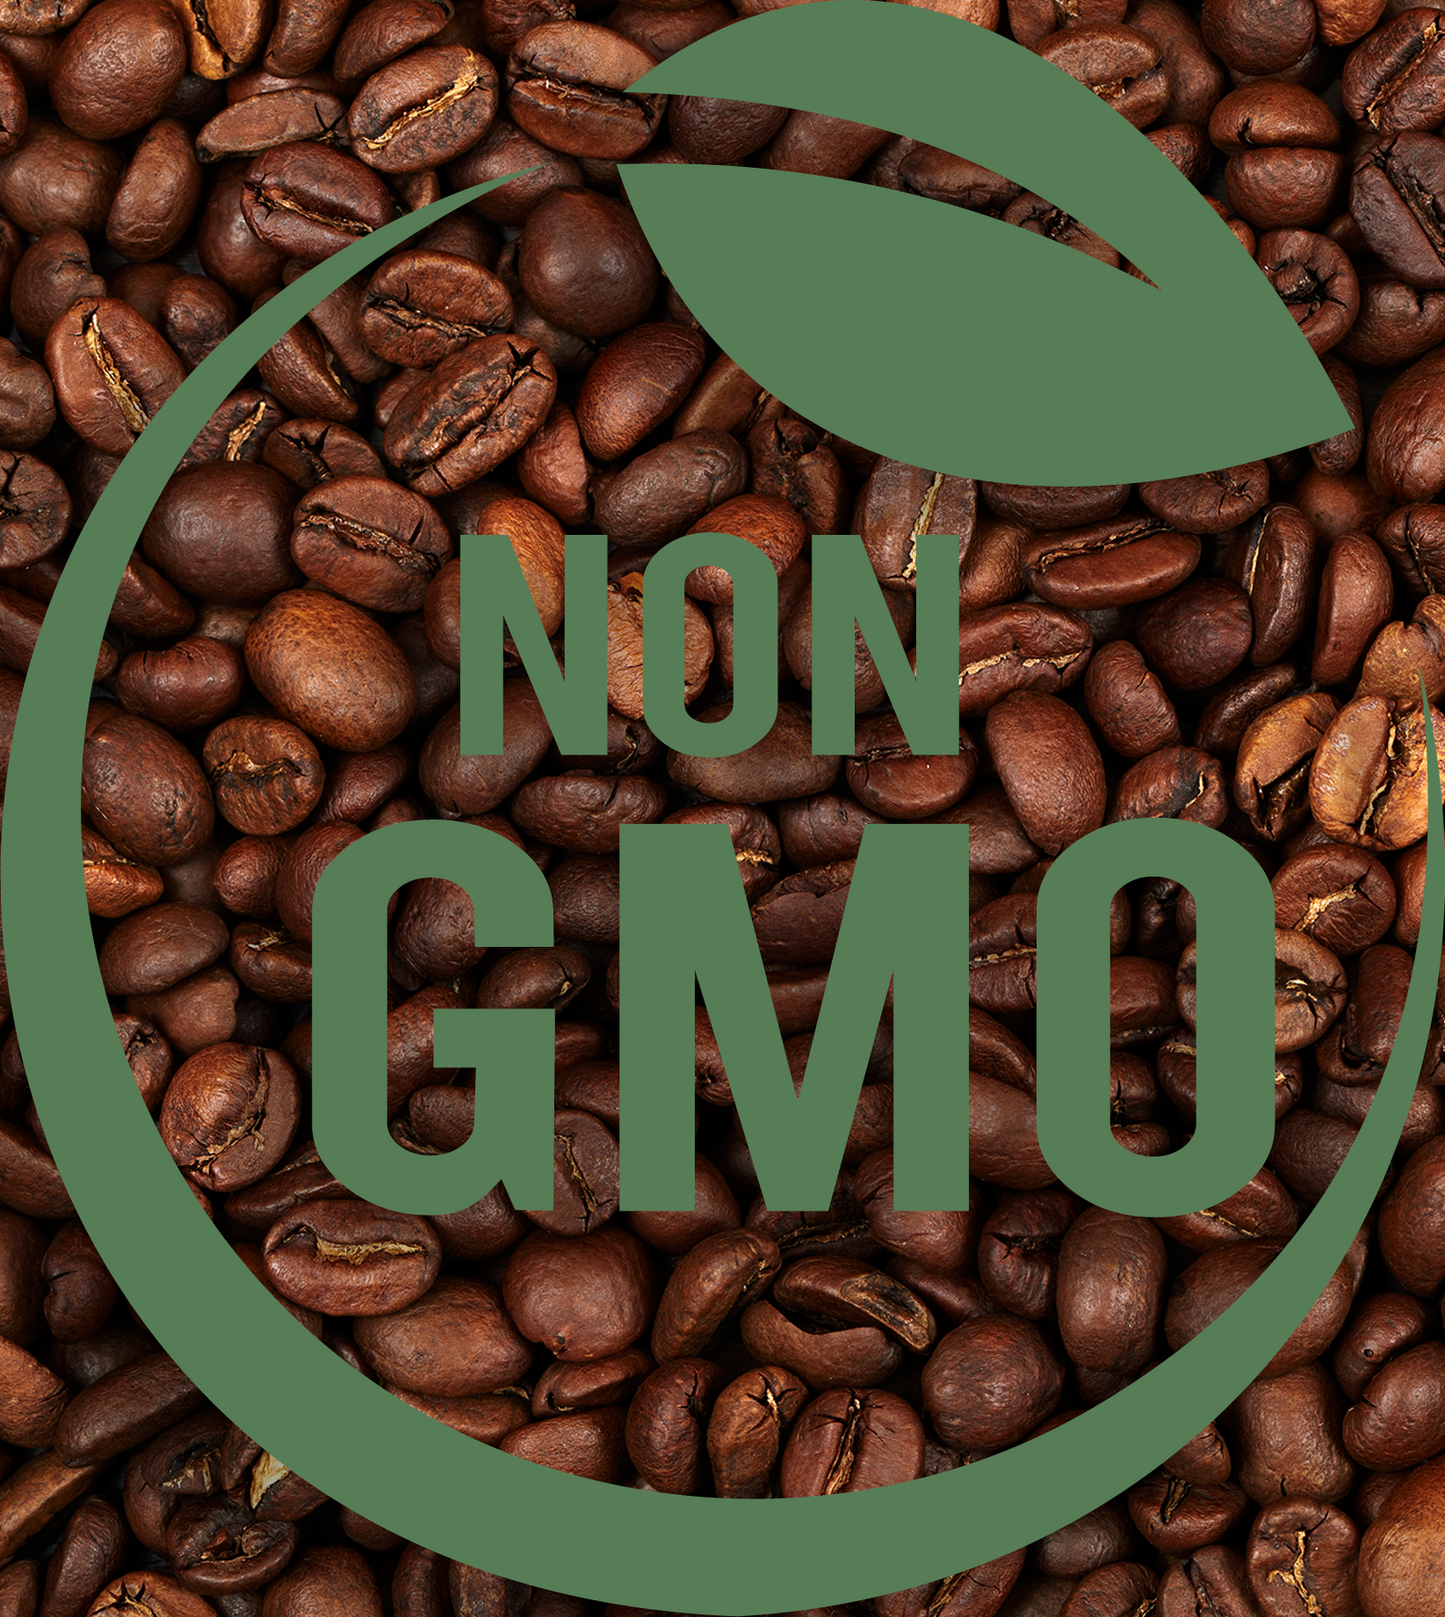 Adventure Dog Coffee Co. Non-GMO logo - Our commitment to using only non-genetically modified coffee beans in our roasting process ensures a natural and sustainable product for our customers.